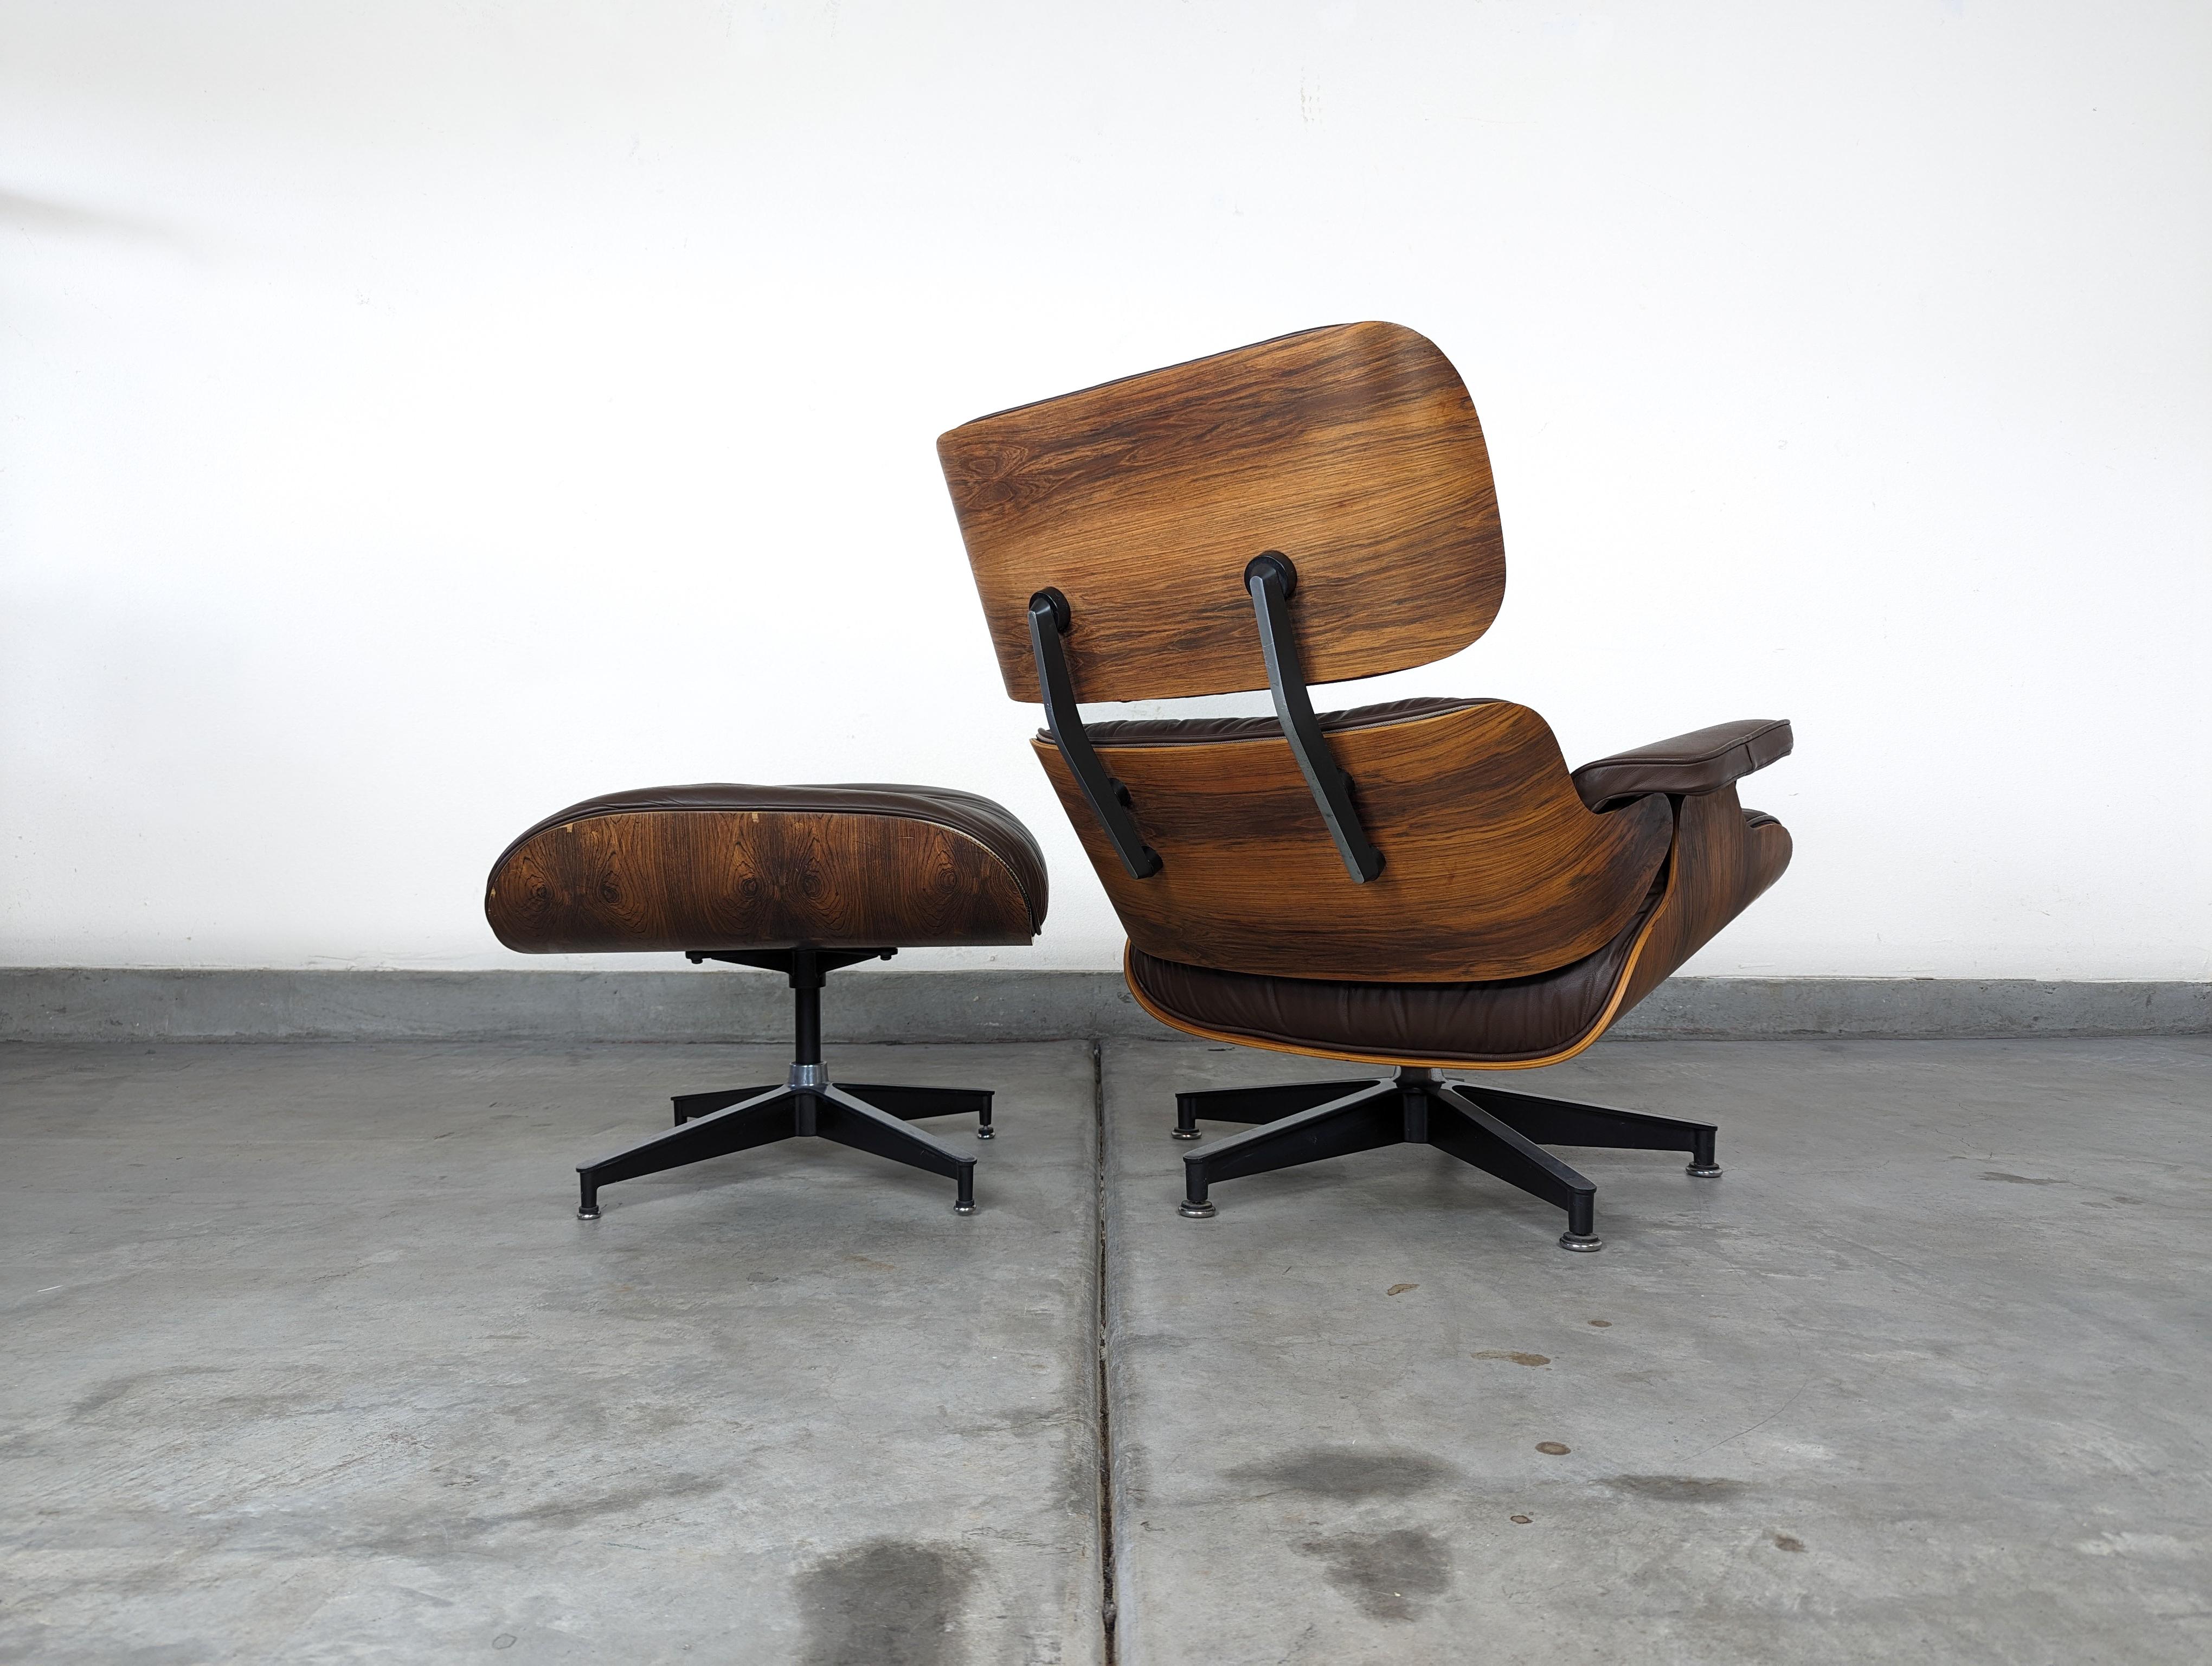 Step into a world of timeless elegance and unparalleled comfort with this authentic mid-century Rosewood Eames Lounge Chair (model #670) and matching ottoman (model #671), a highly sought-after collector's item designed by the iconic duo Ray and